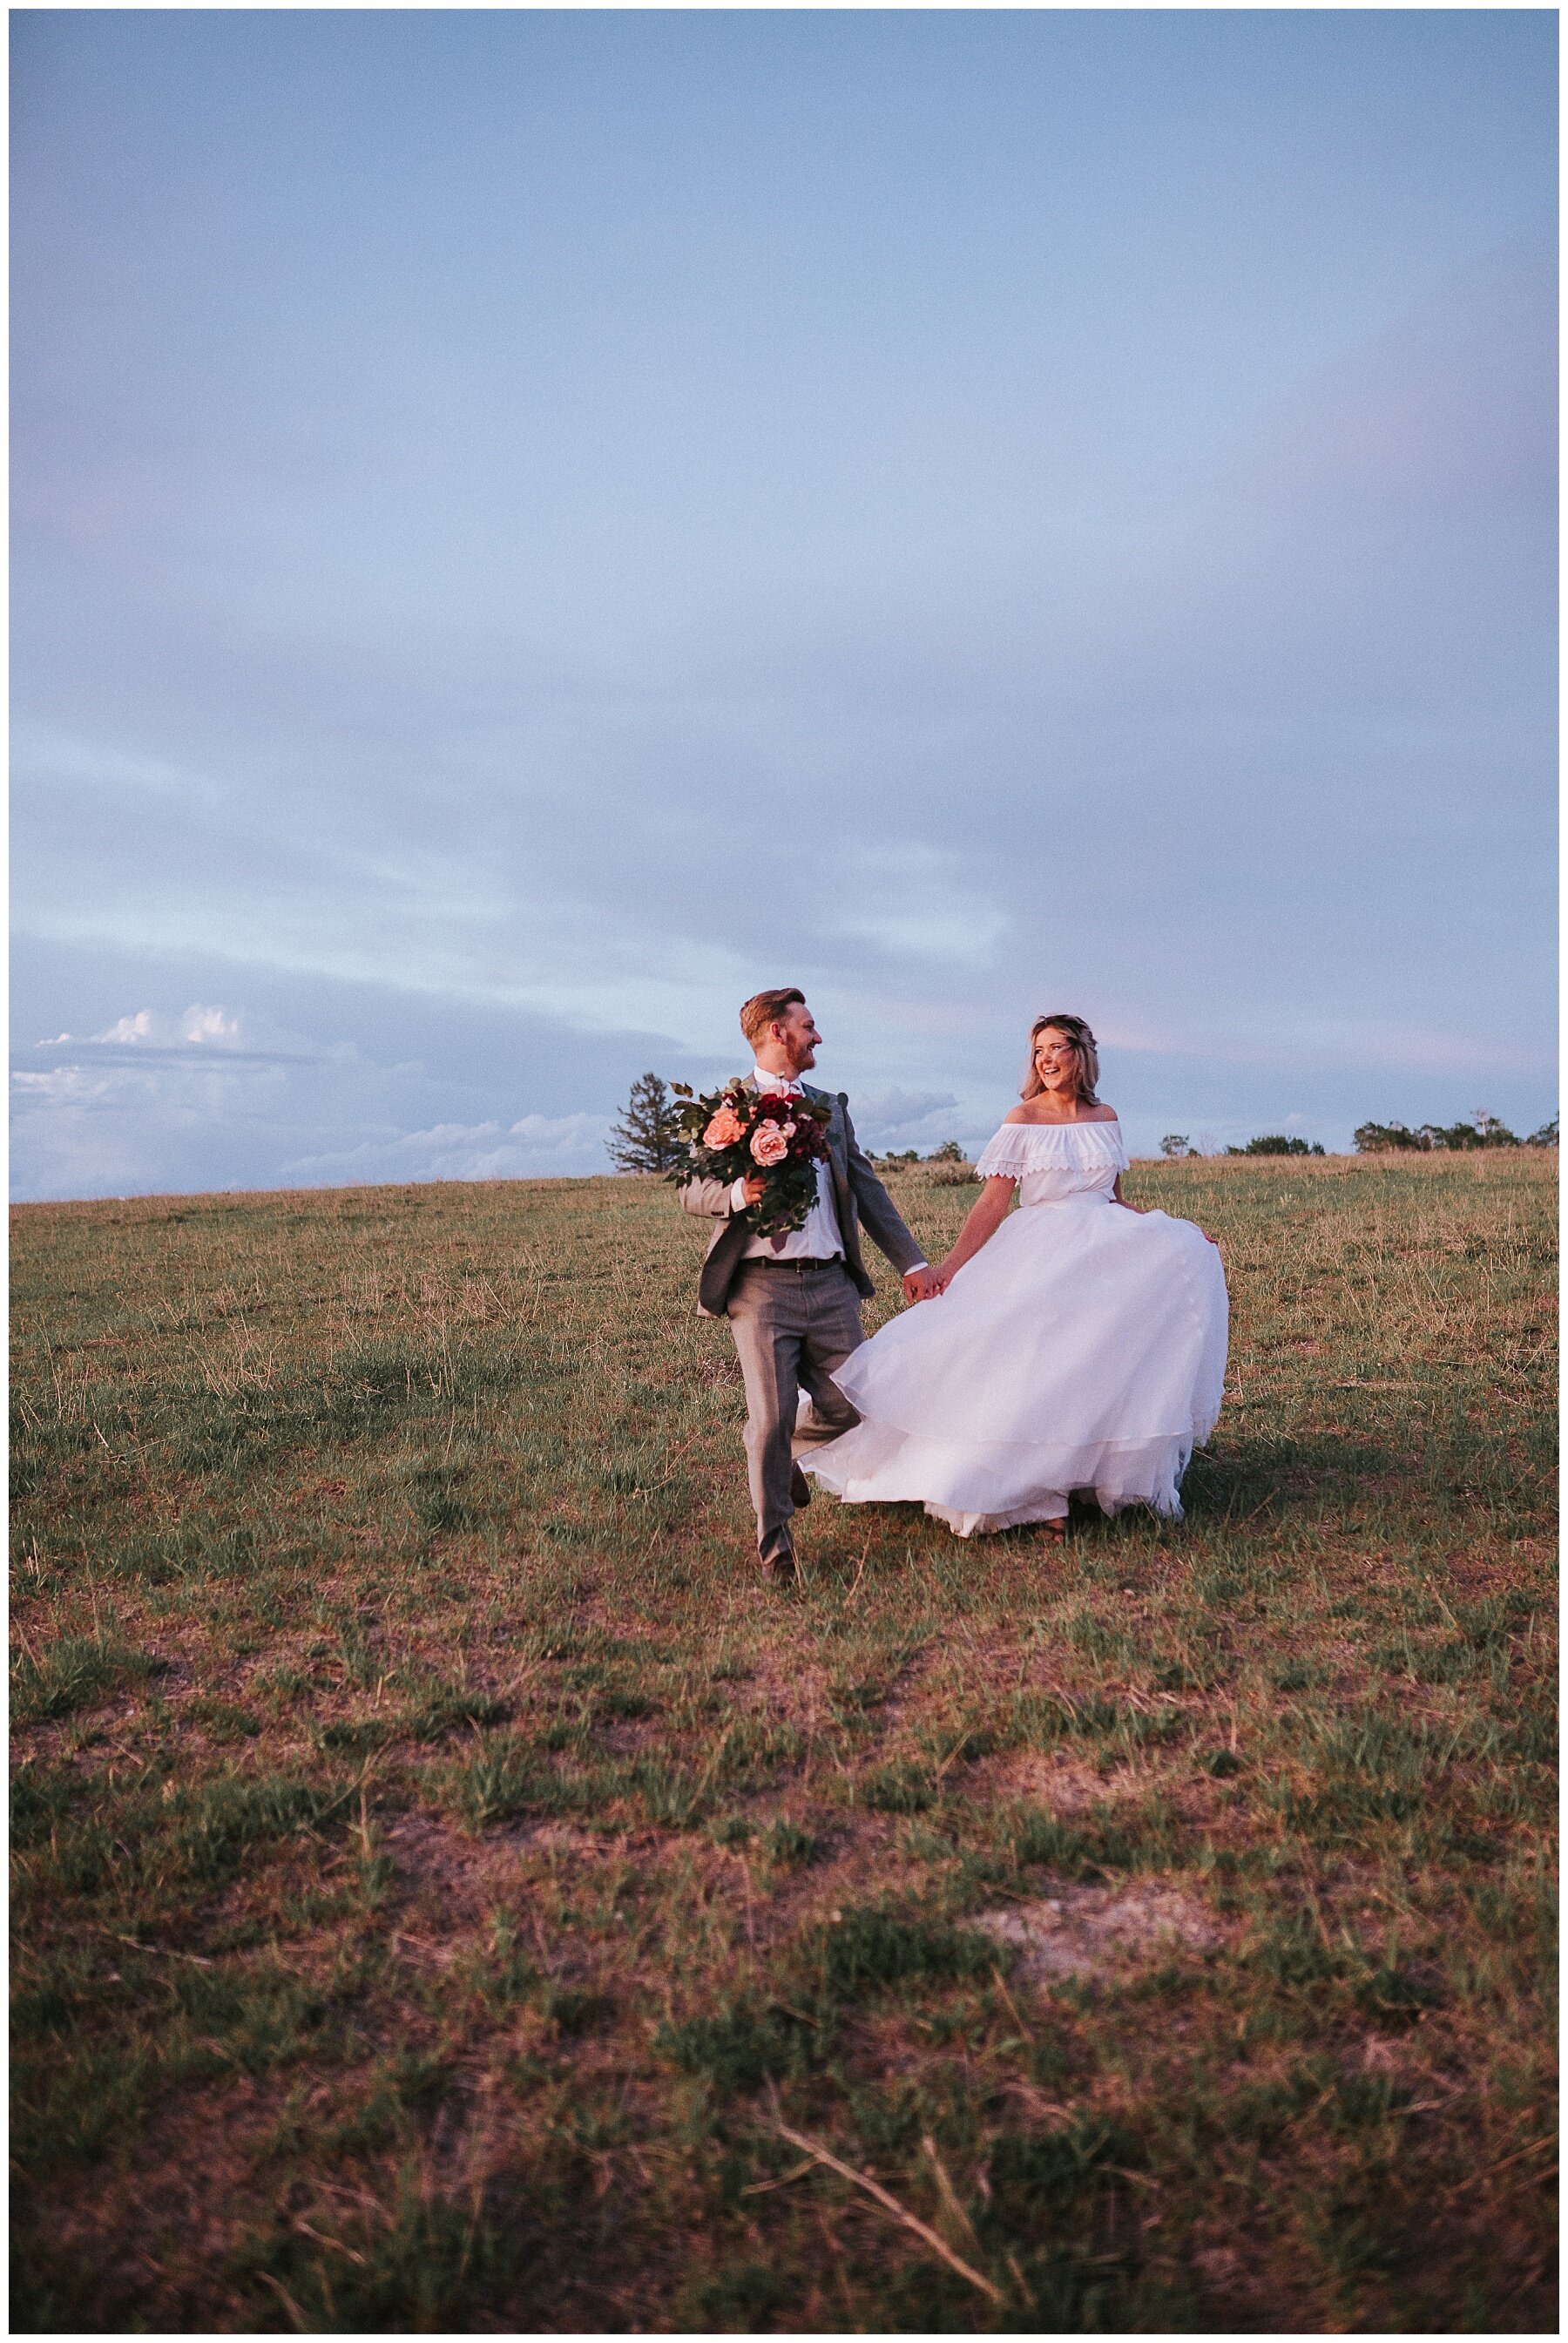 wedding-day-photographer-twin-falls-idaho-wedding-photographer-wedding-day-idaho-falls-photographer-sunset-bridals-elopement-photographer-blue-hour-photography-boho-bride-off-the-shoulder-wedding-dress-small-intimate-wedding-idaho-wedding-photographer-elopement-photographer-traveling-photographer